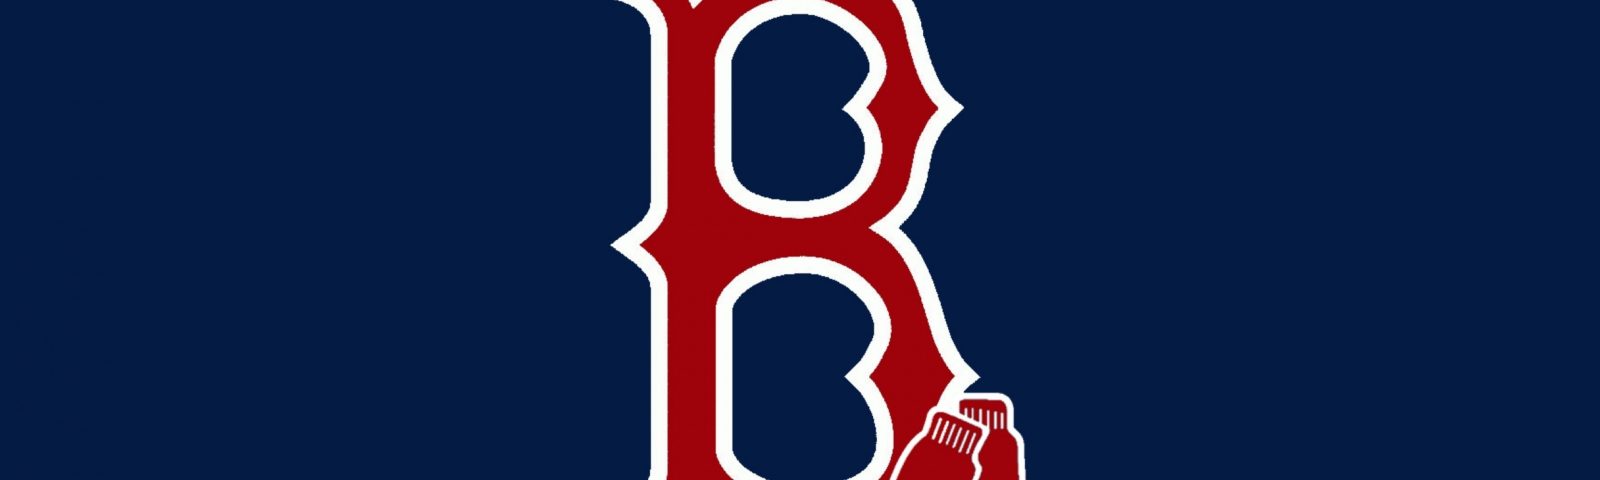 Tablet Ipad 1&2 - Boston Red Sox Wallpaper Iphone X , HD Wallpaper & Backgrounds